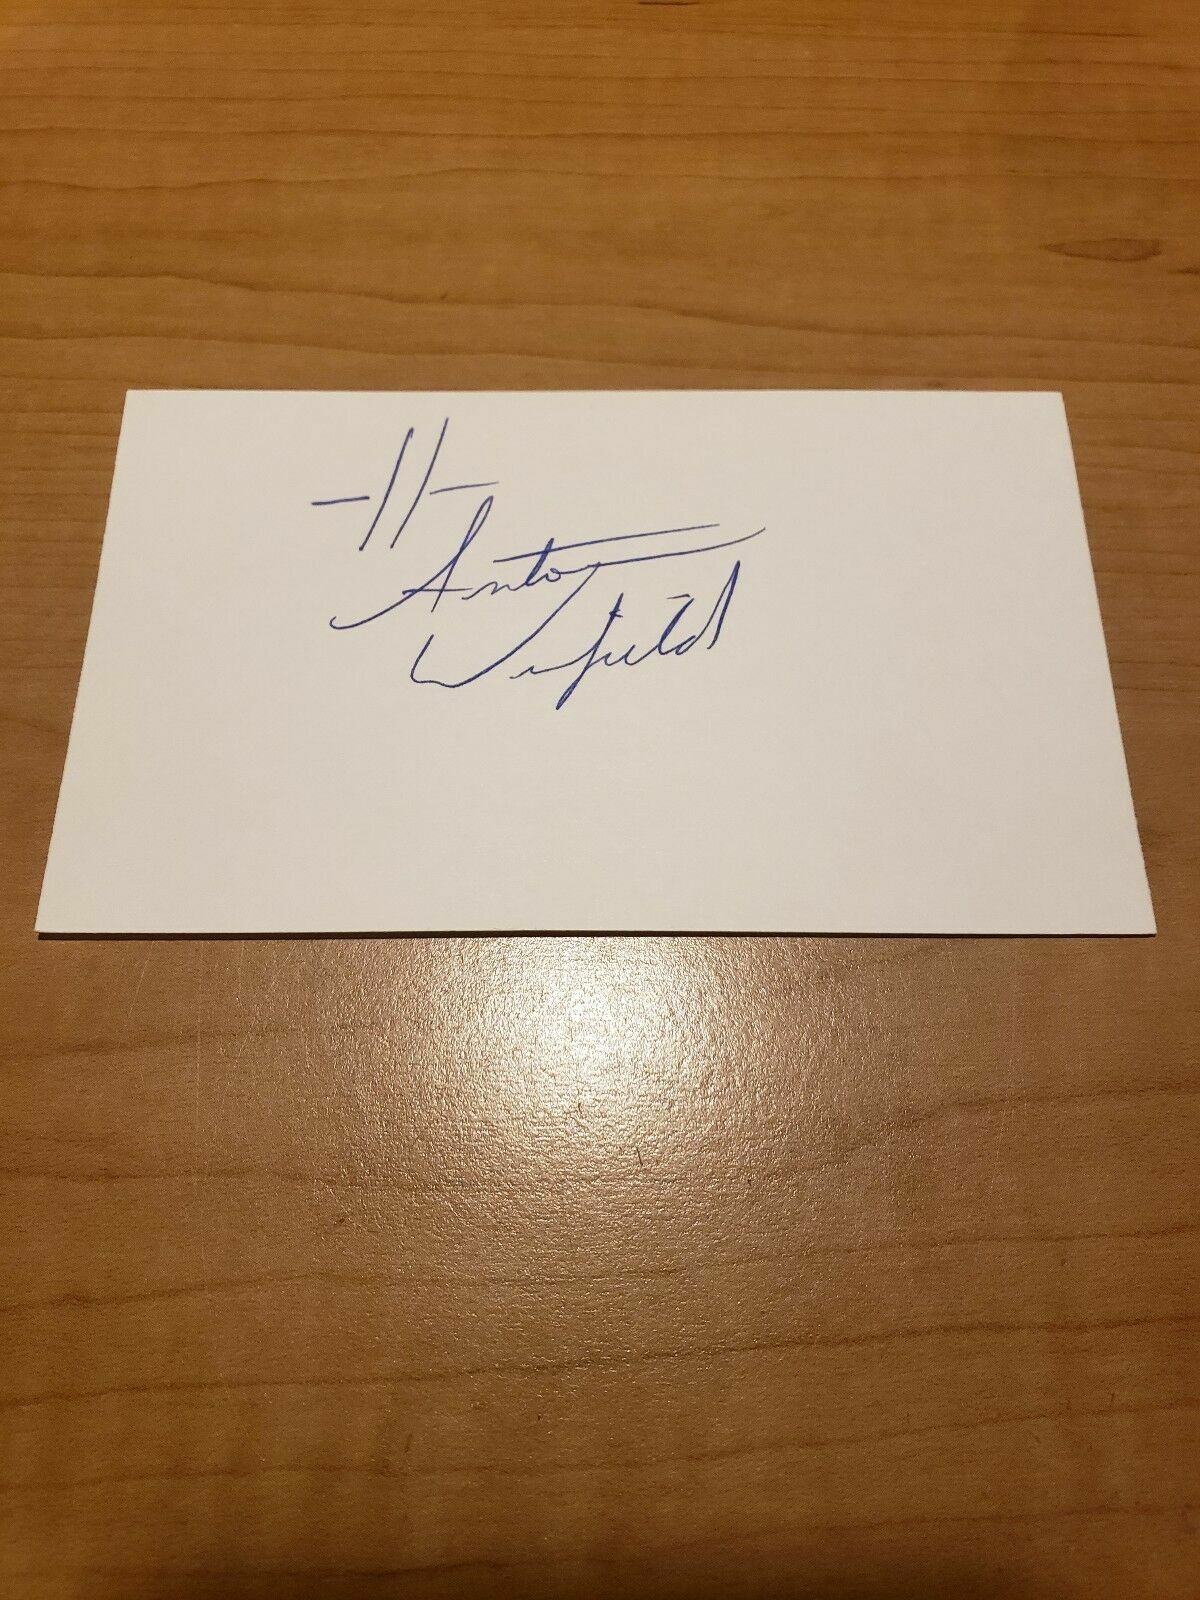 ANTOINE WINFIELD - FOOTBALL - AUTOGRAPH SIGNED - INDEX CARD - AUTHENTIC- A6027